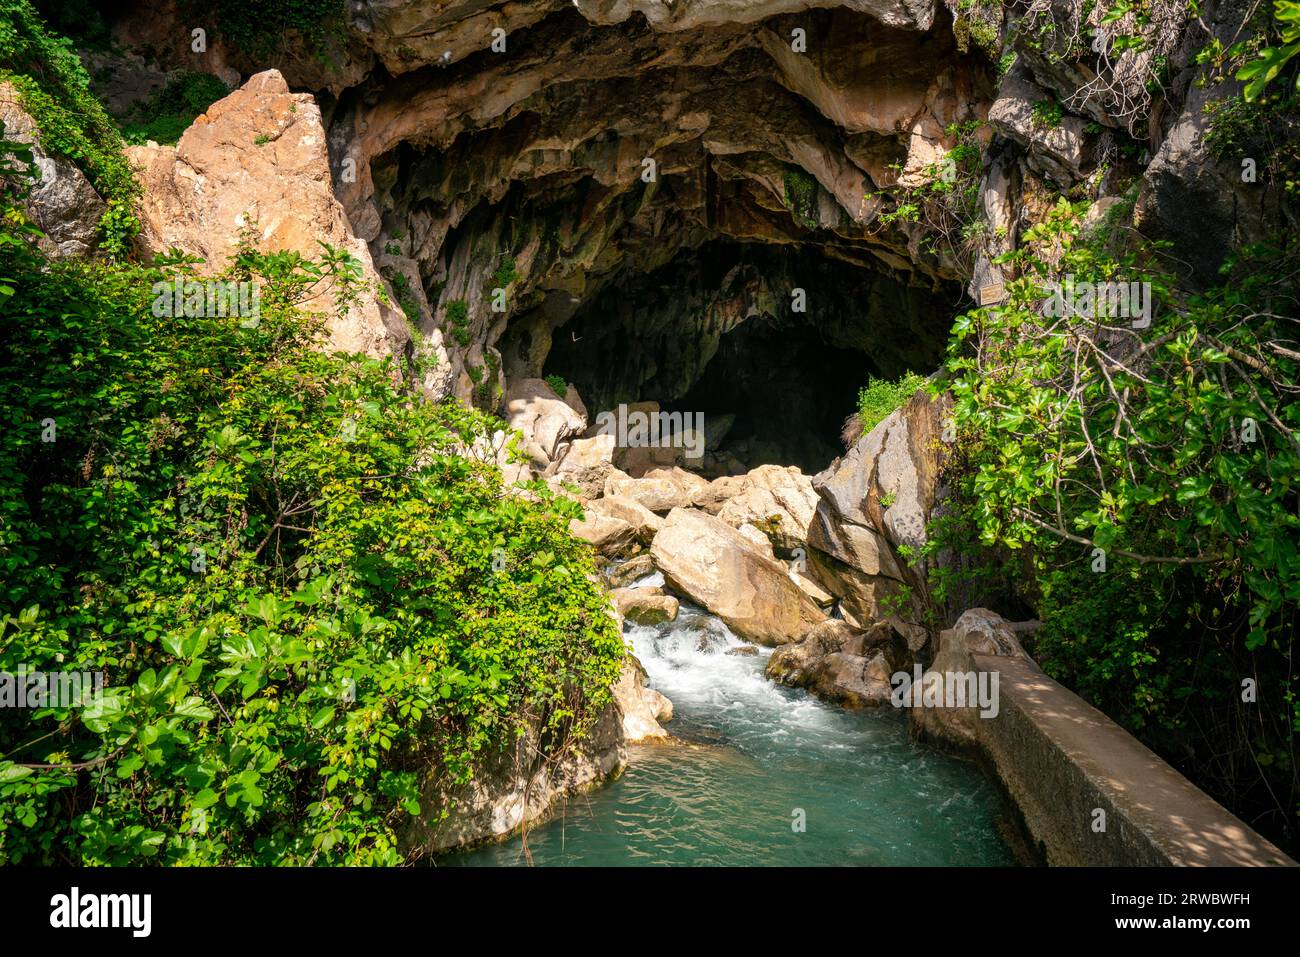 From above transparent clear rippling river water flowing through rocky rough cave called Cueva del gato inBenaoján, Malaga, Spain Stock Photo